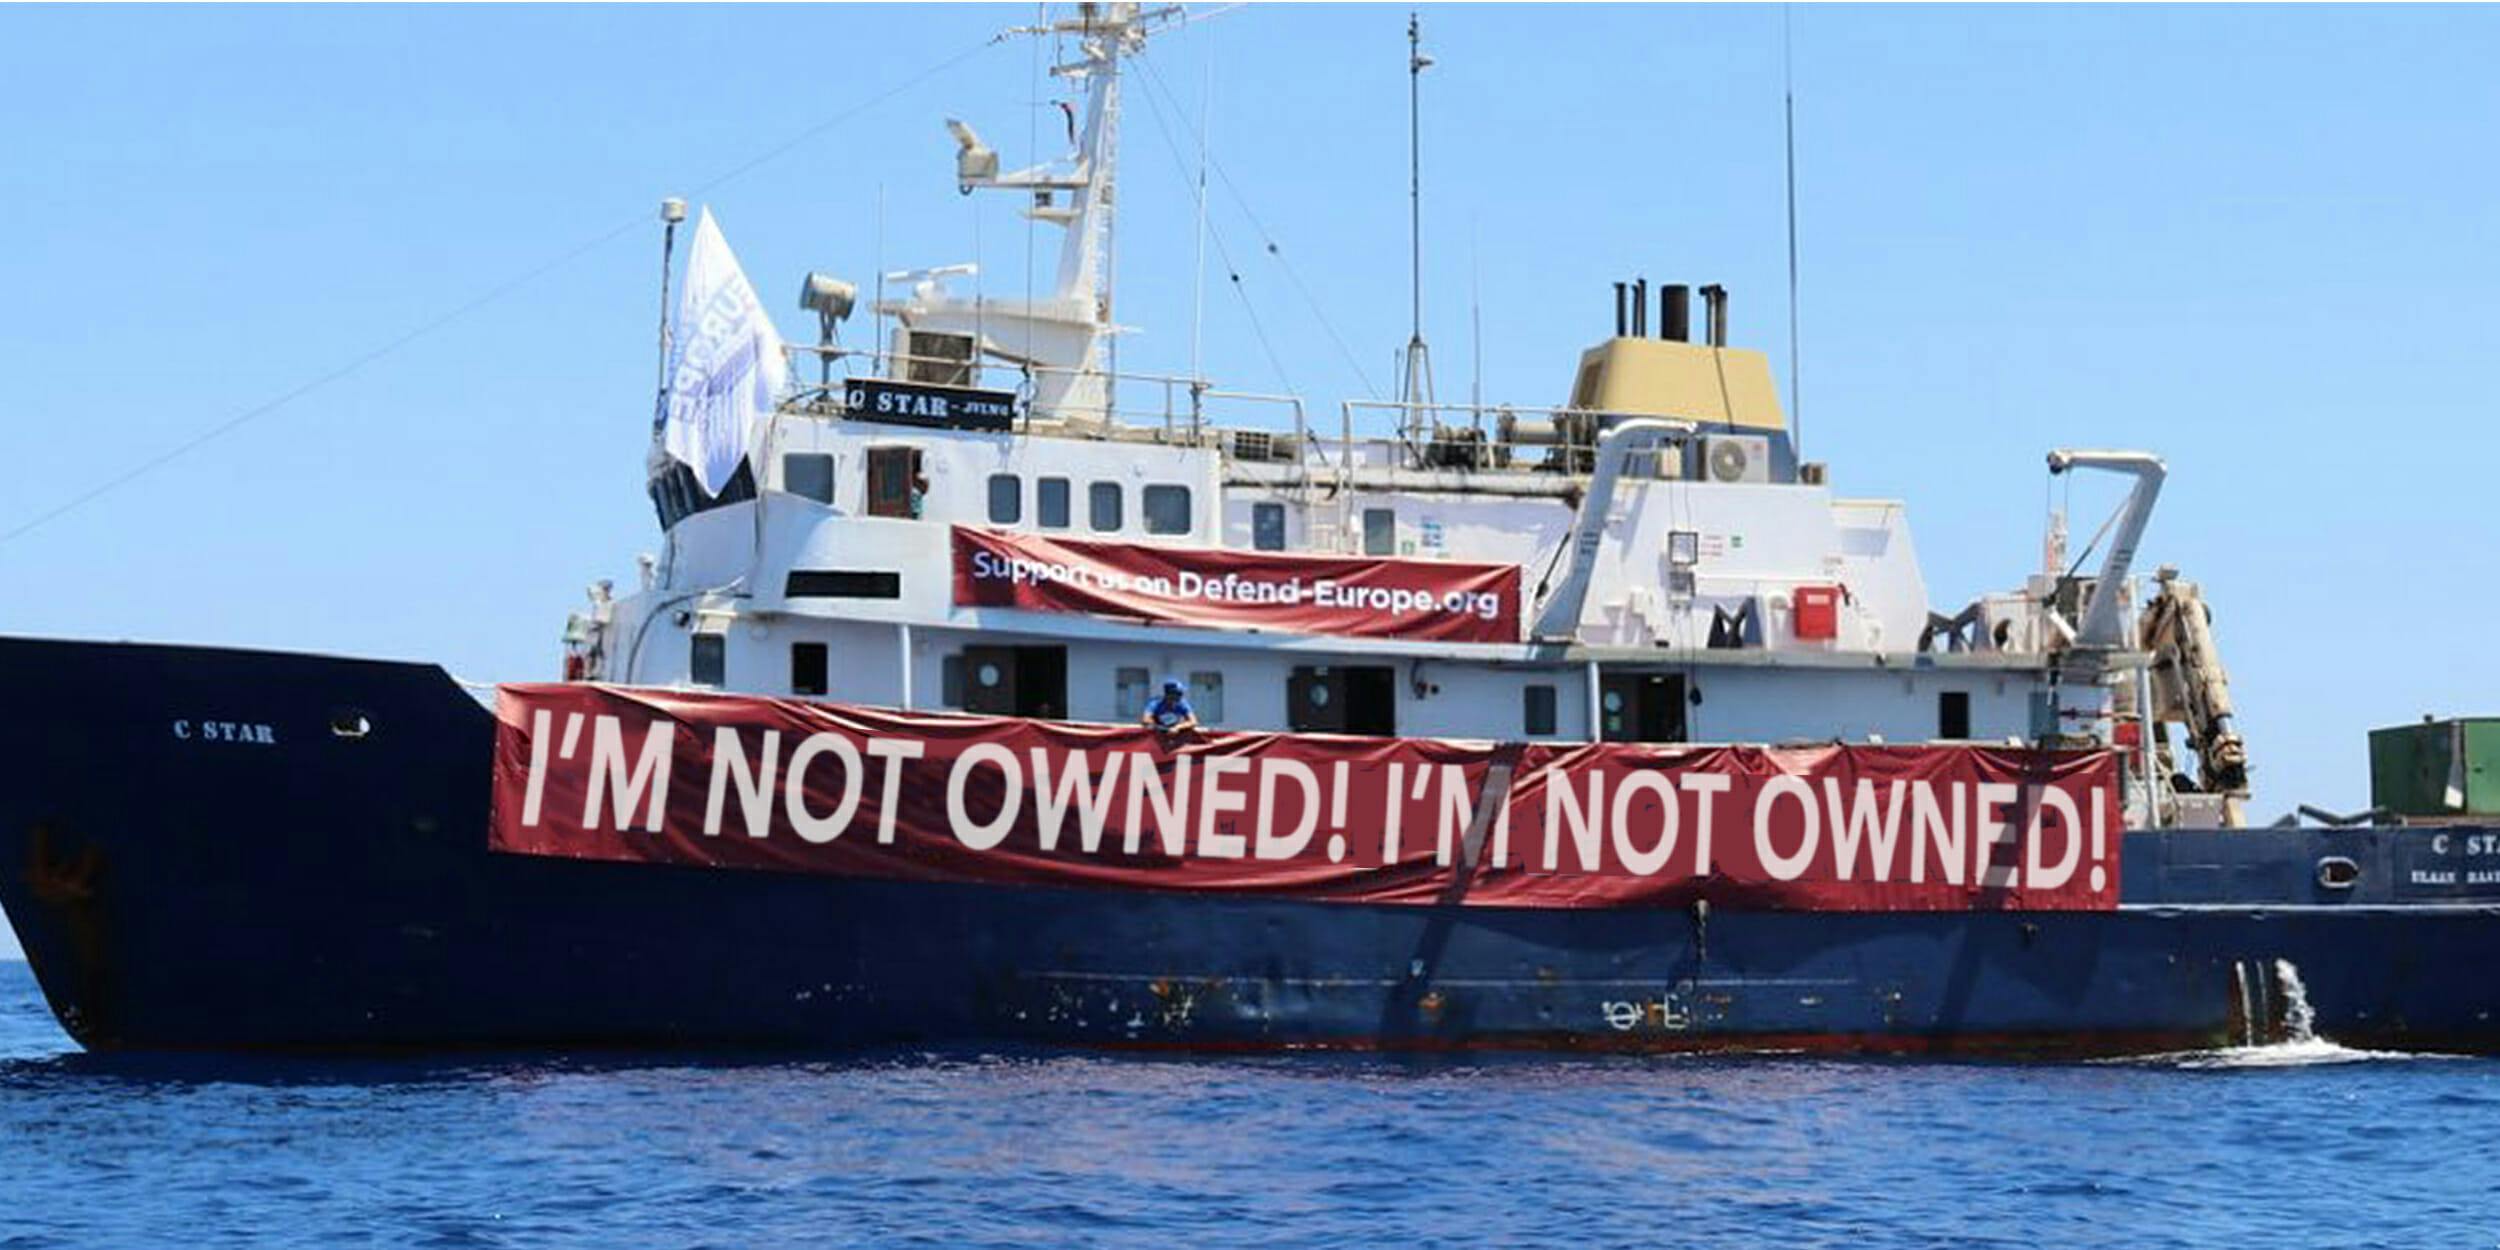 C Star ship with "I'm not owned! I'm not owned!" banner